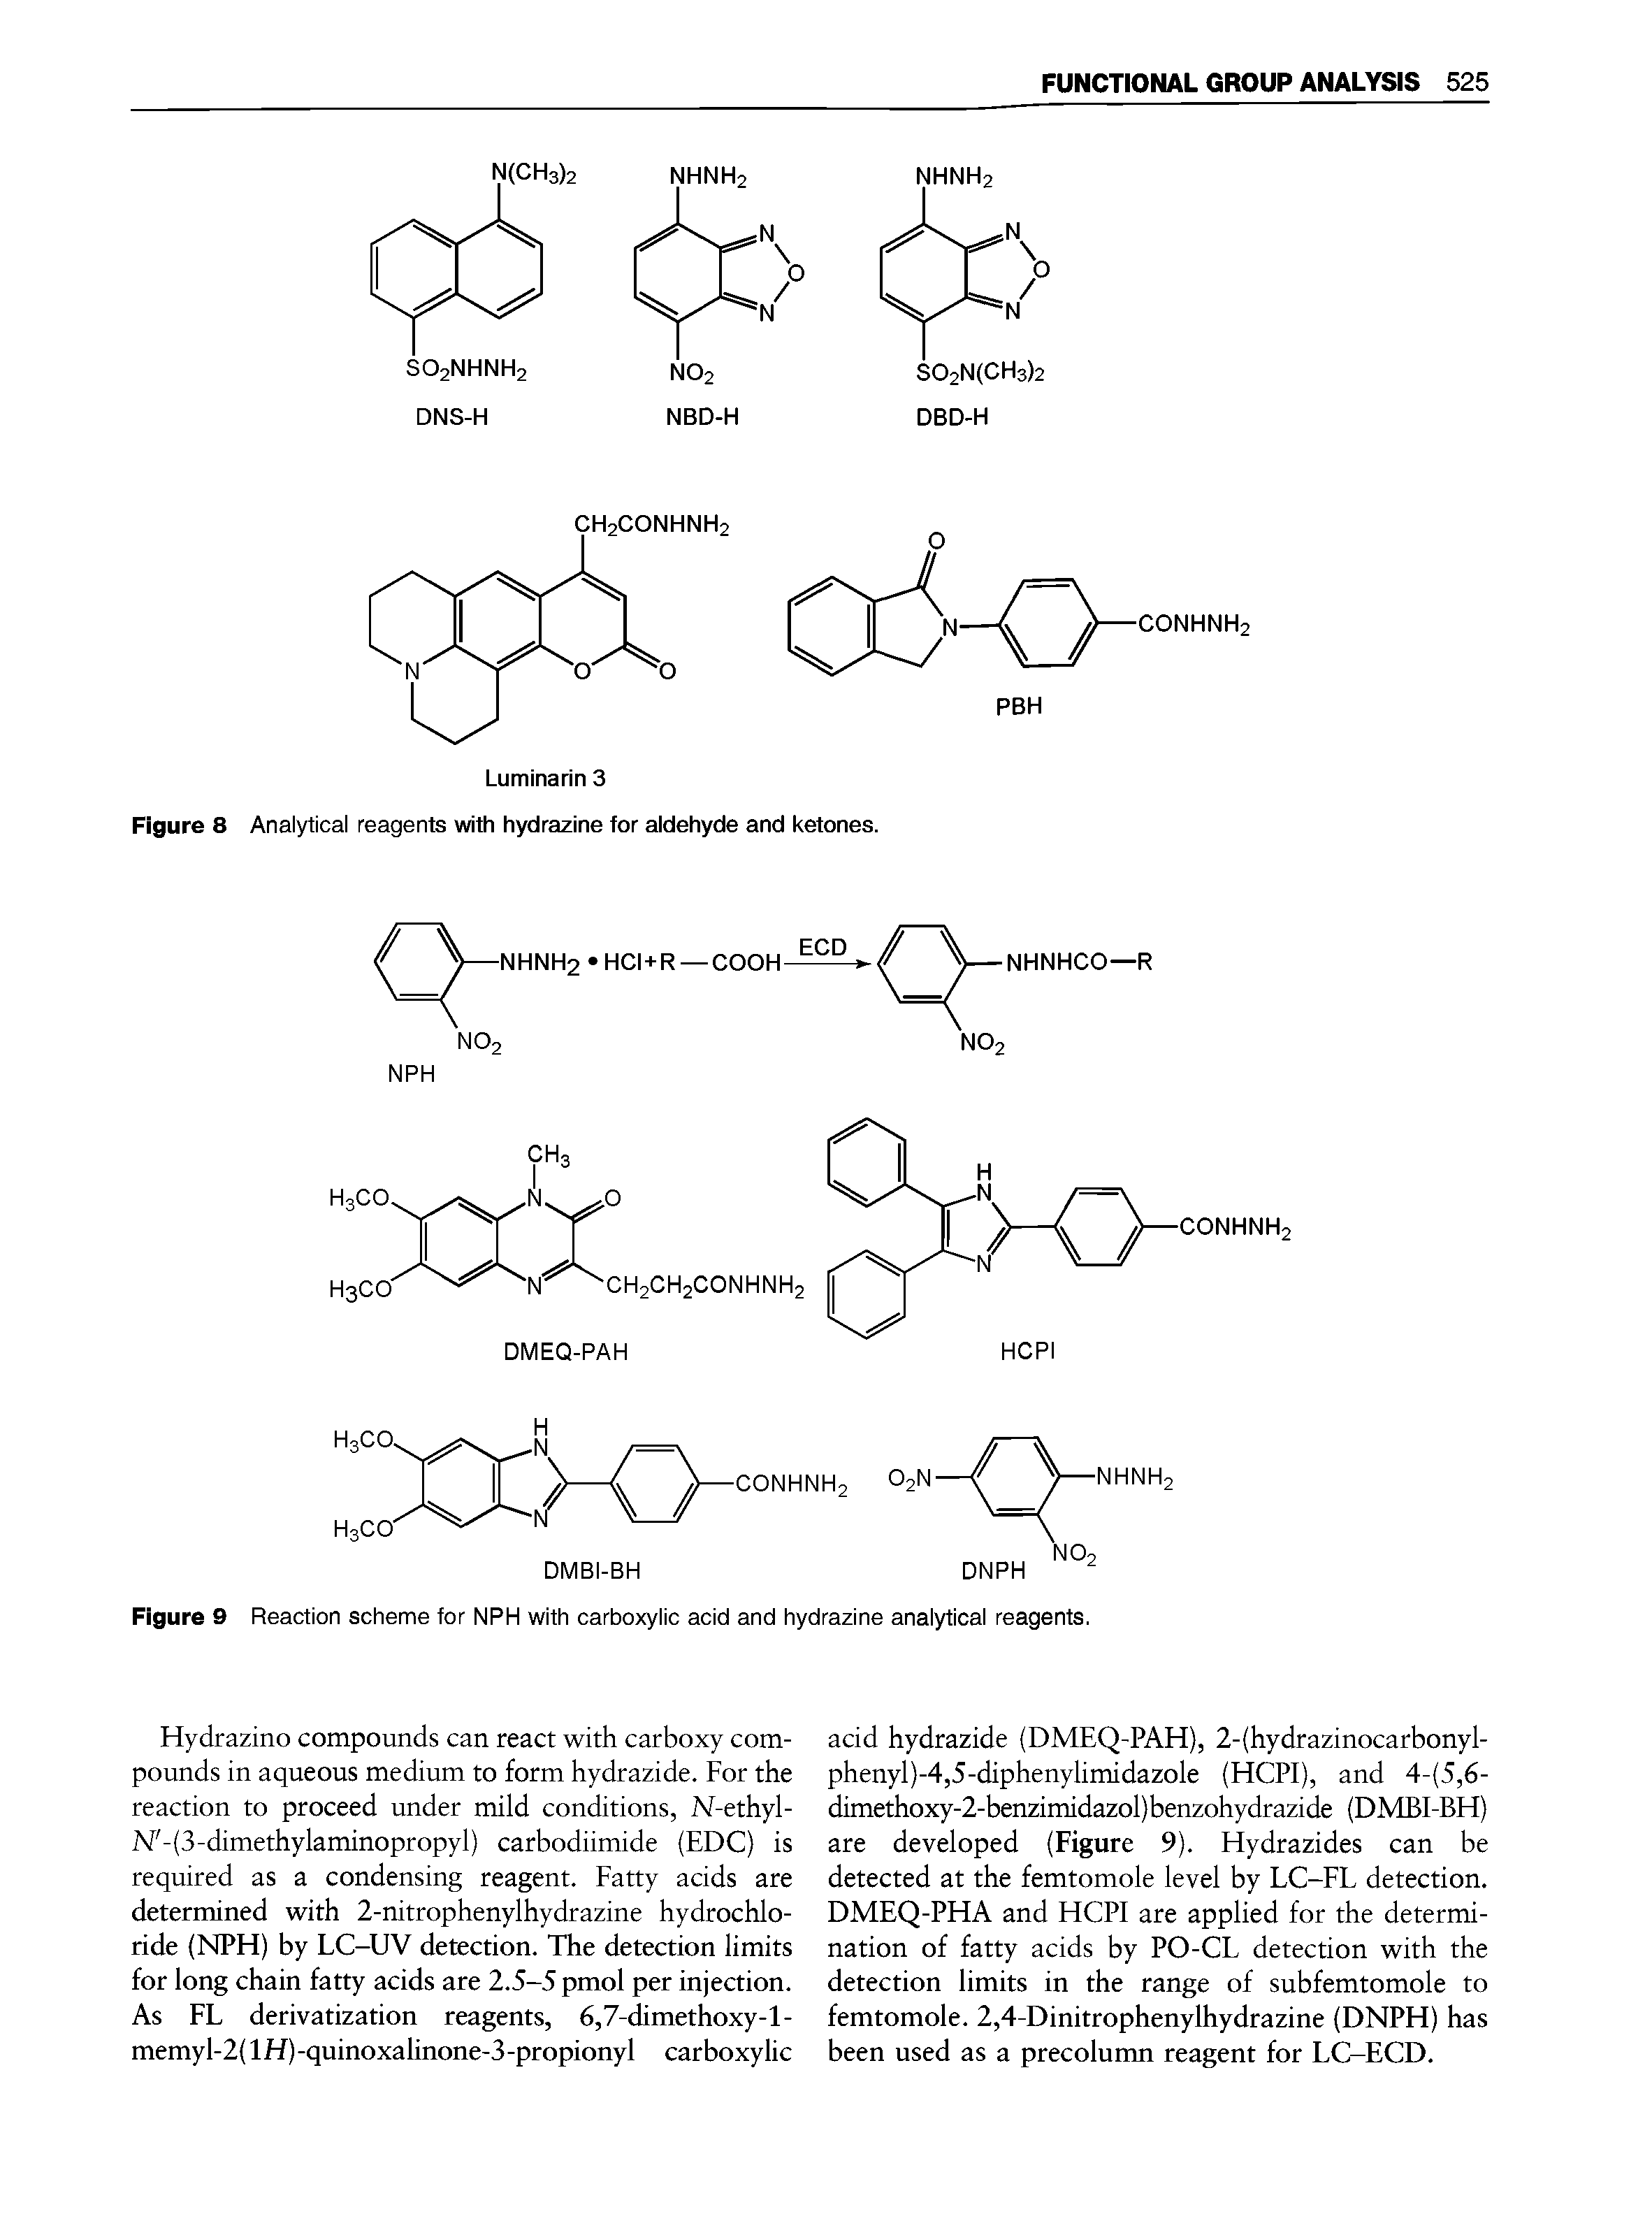 Figure 8 Analytical reagents with hydrazine for aldehyde and ketones.